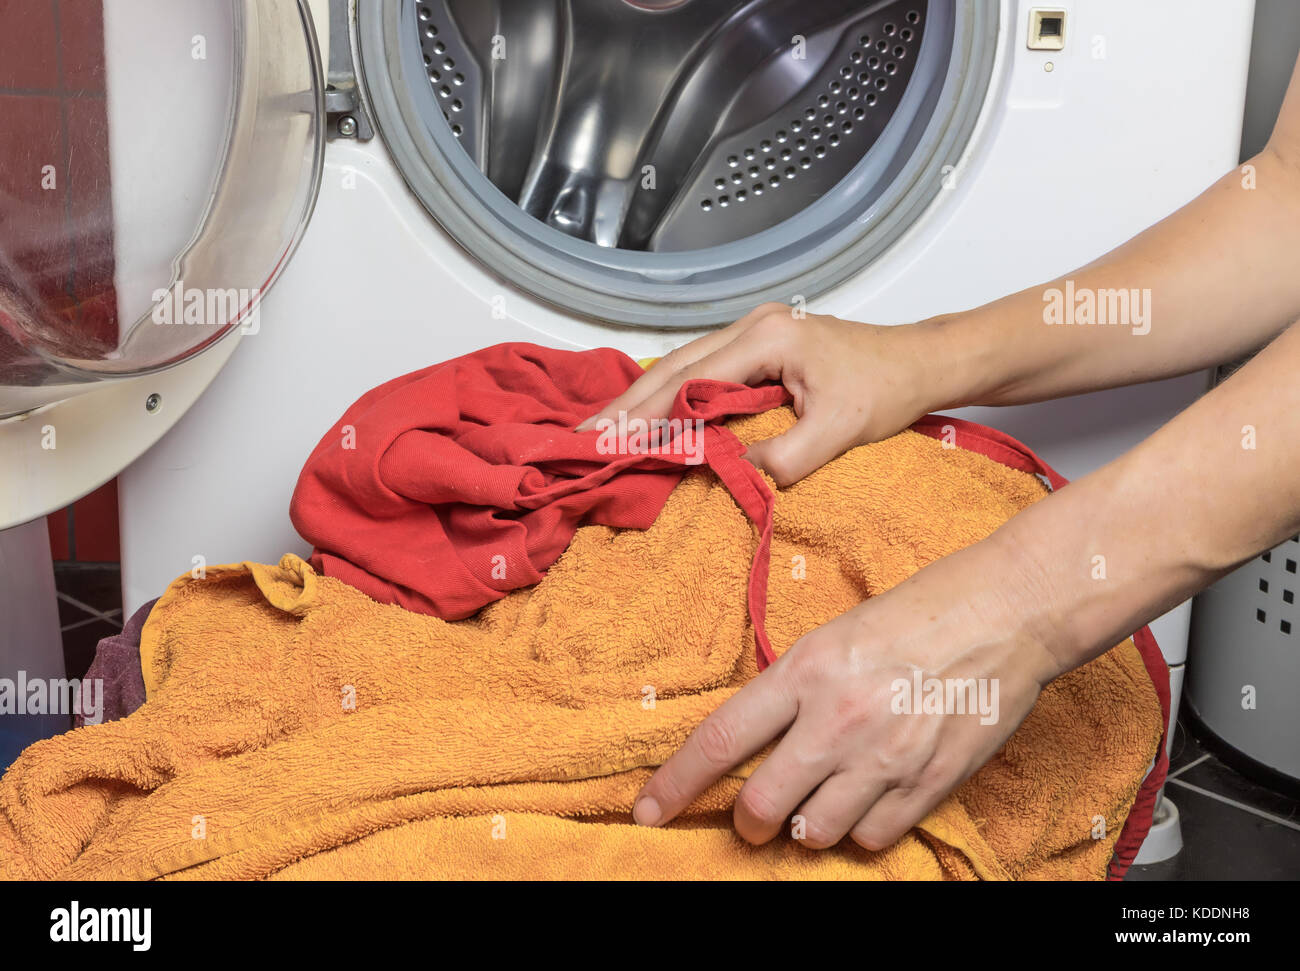 Closeup view of the hands of housewife ready to put dirty laundry in the washing machine. Stock Photo